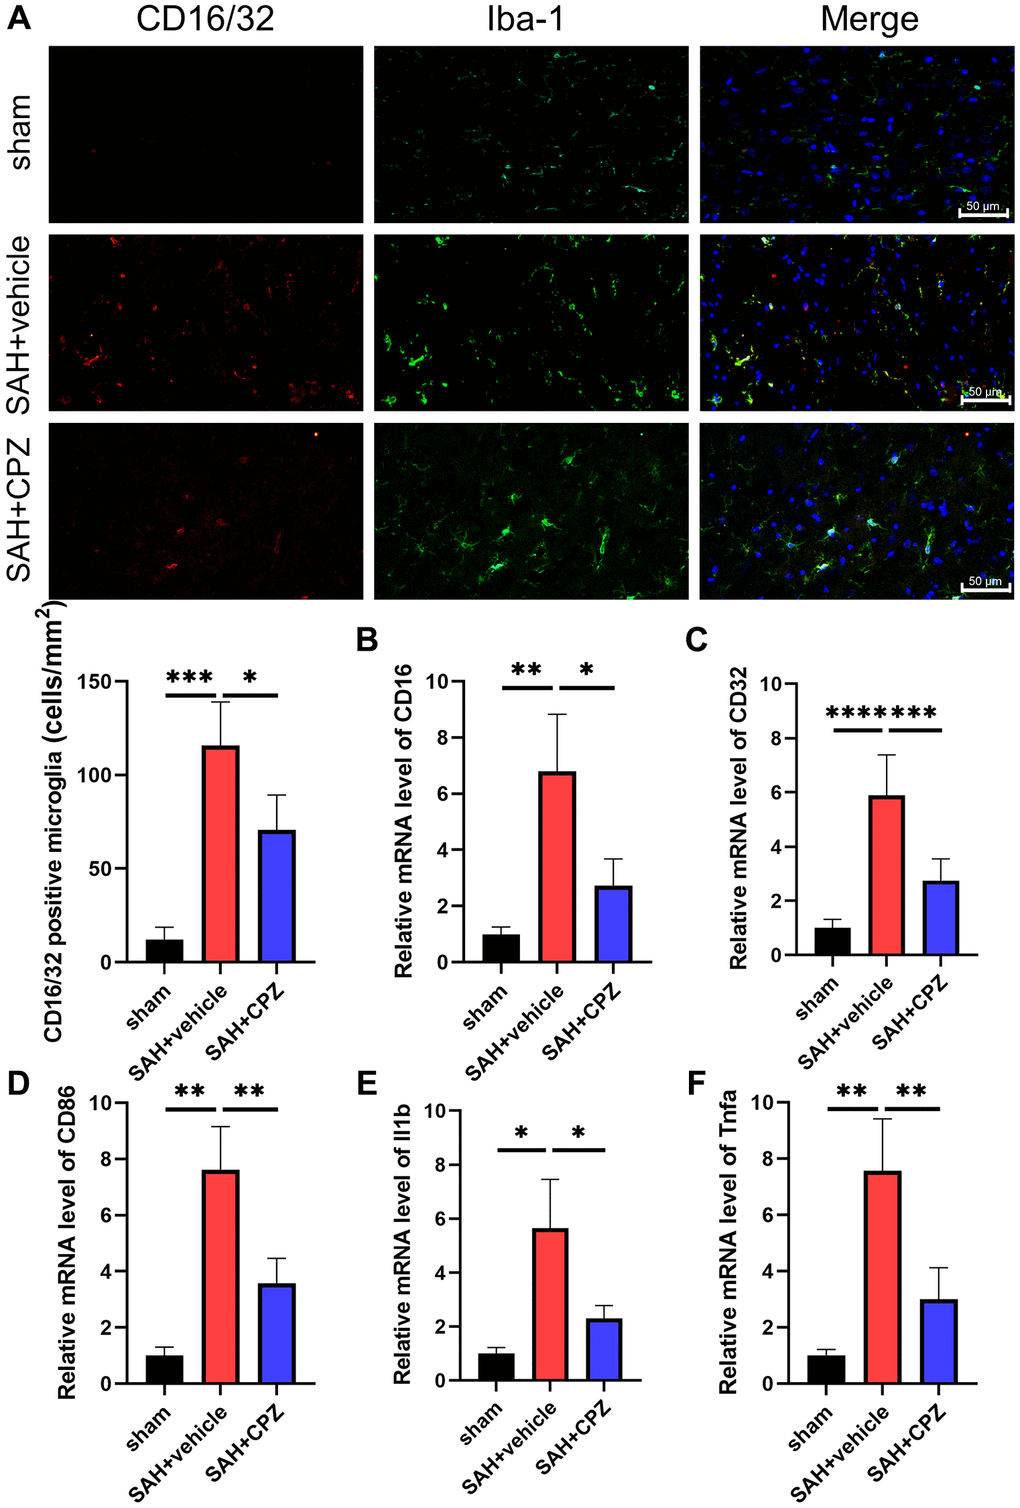 Effect of TRPV1 on inflammation response after SAH. (A) The immunofluorescence showed the number of CD16/32 positive microglia/macrophages at 24 h post-SAH. (B–F) The mRNA level of CD16, CD32, CD86, IL-1β, and TNF-α in brain tissues at 24 h post-SAH. *p **p ***p ****p 